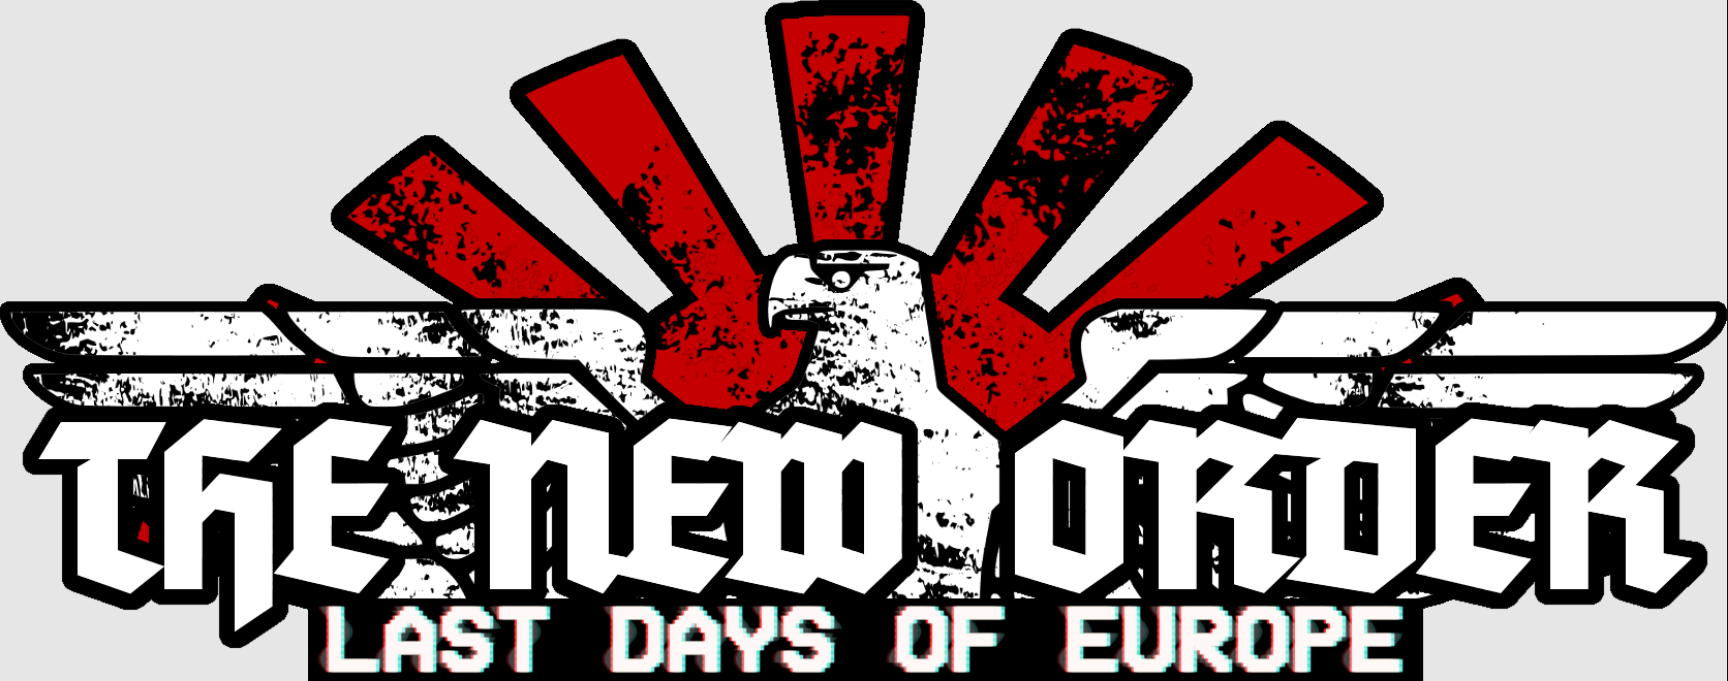 The New order last Days of Europe. TNO логотип. The New order last Days of Europe логотип. The New order hoi4 logo.